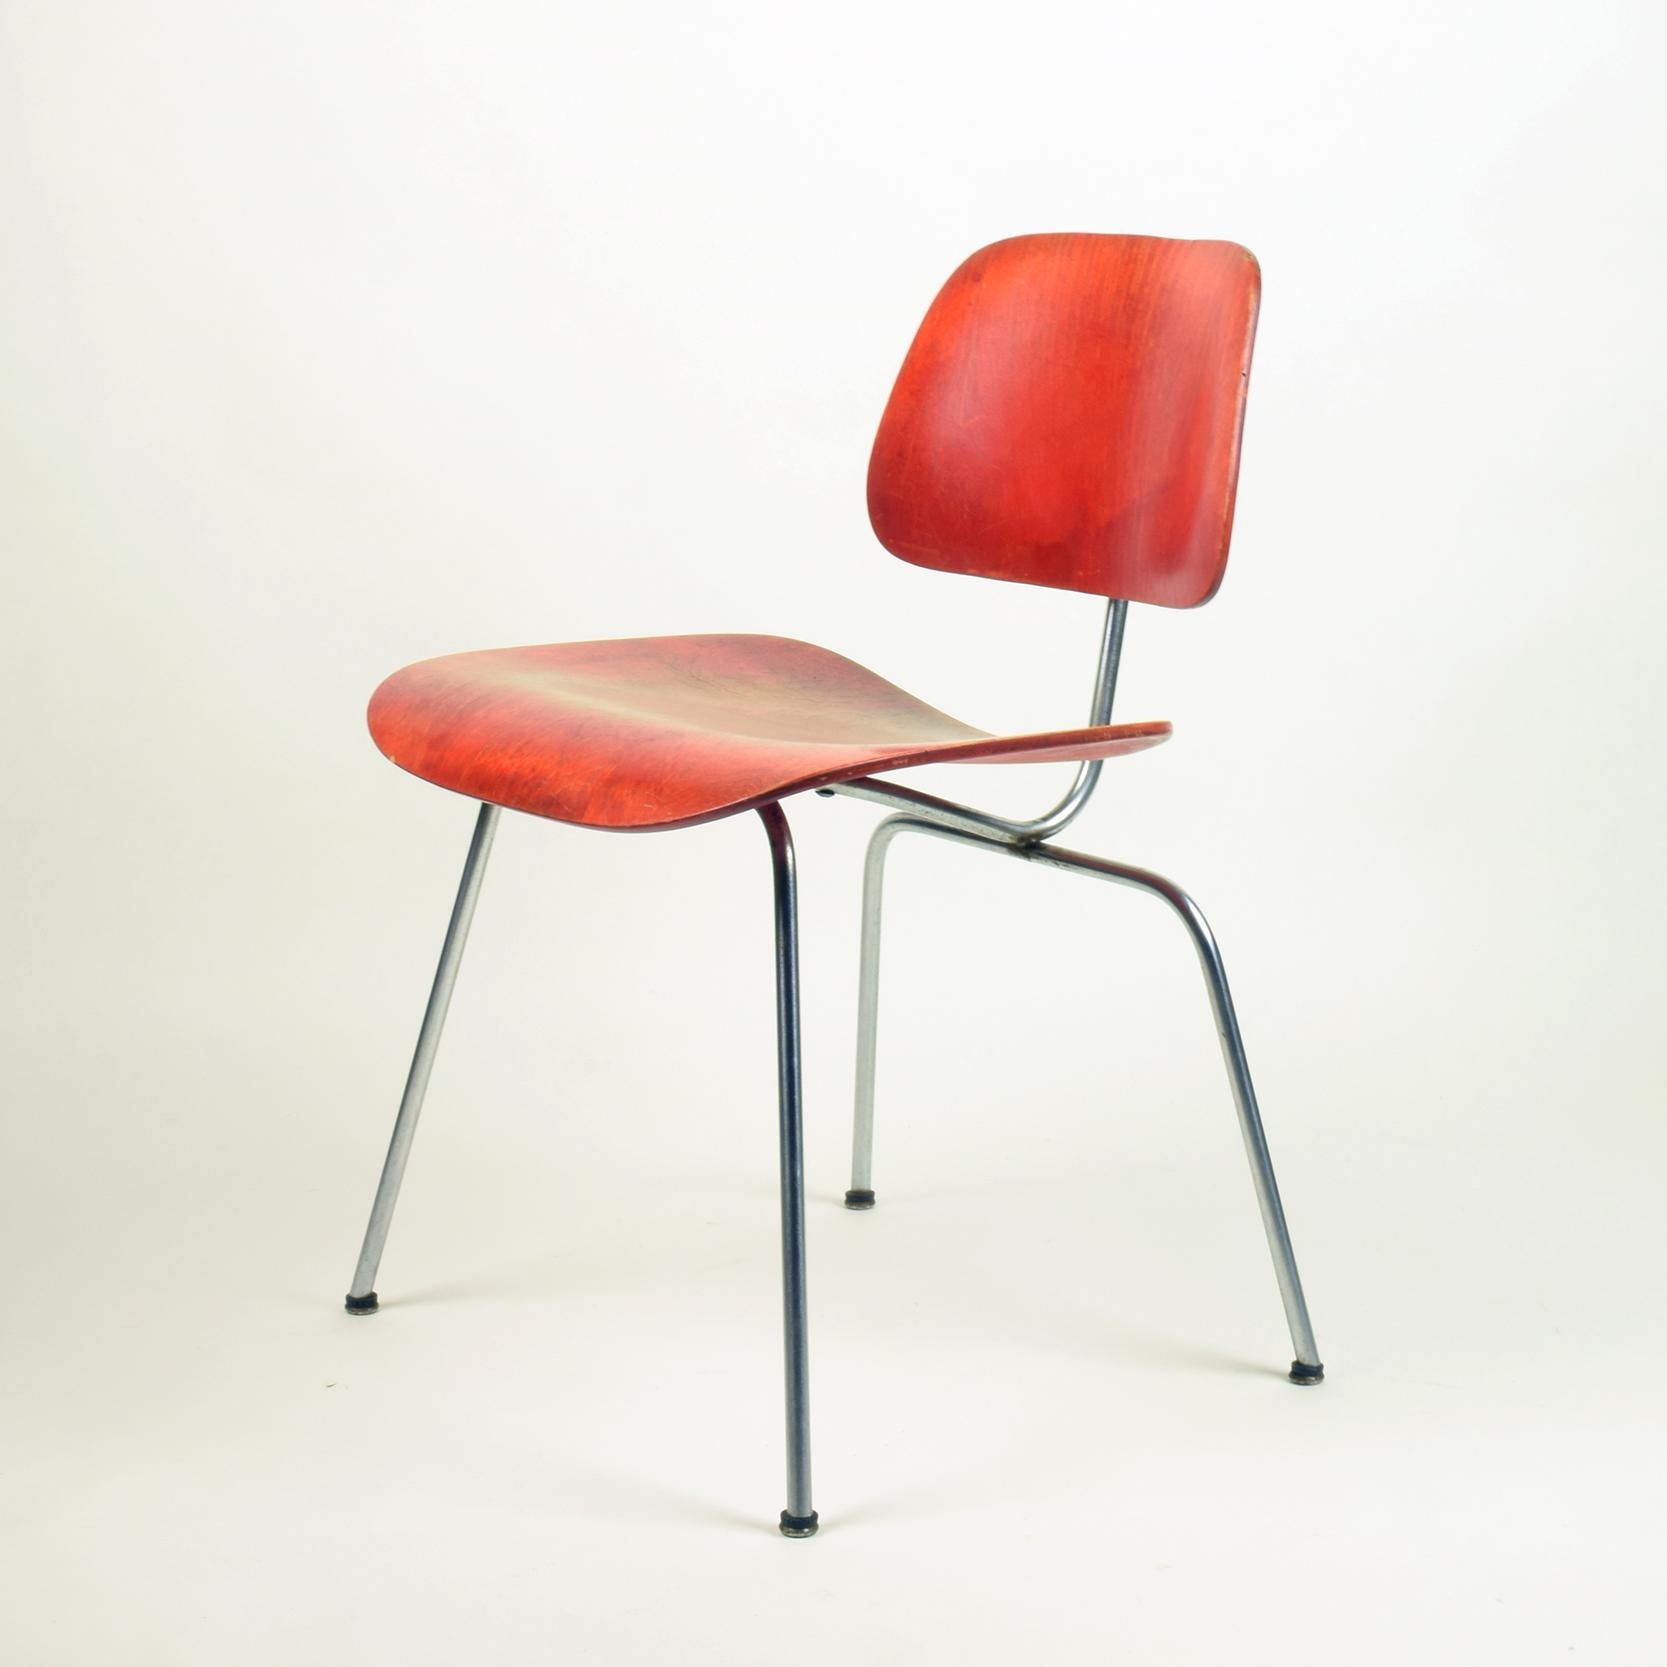 Charles & Ray Eames
Herman Miller, USA (manufacturer)

'DCM' chair, designed 1946, this example manufactured 1951.

Mounded plywood with red aniline dye finish, chromed steel. Stamped to underside '8 51'.
Stunning early example of this